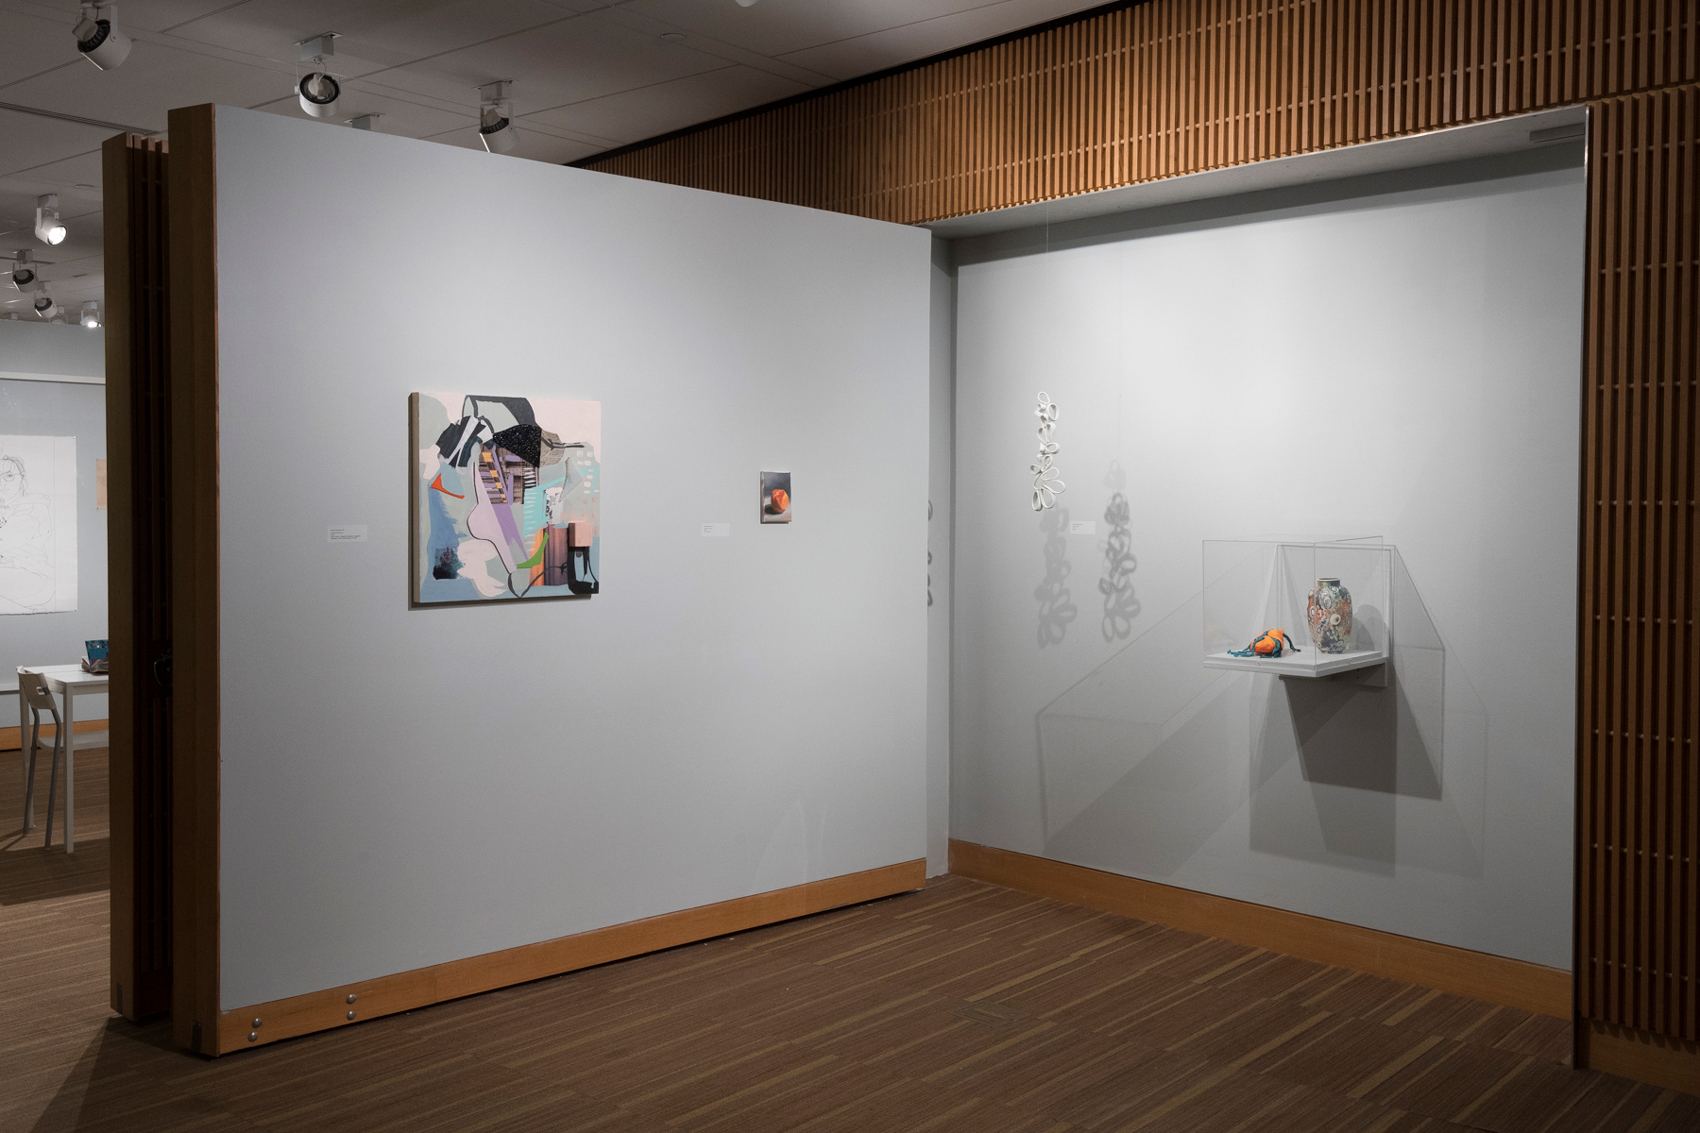 Installation view of the 2020 Student Biennial in the Harrison Gallery